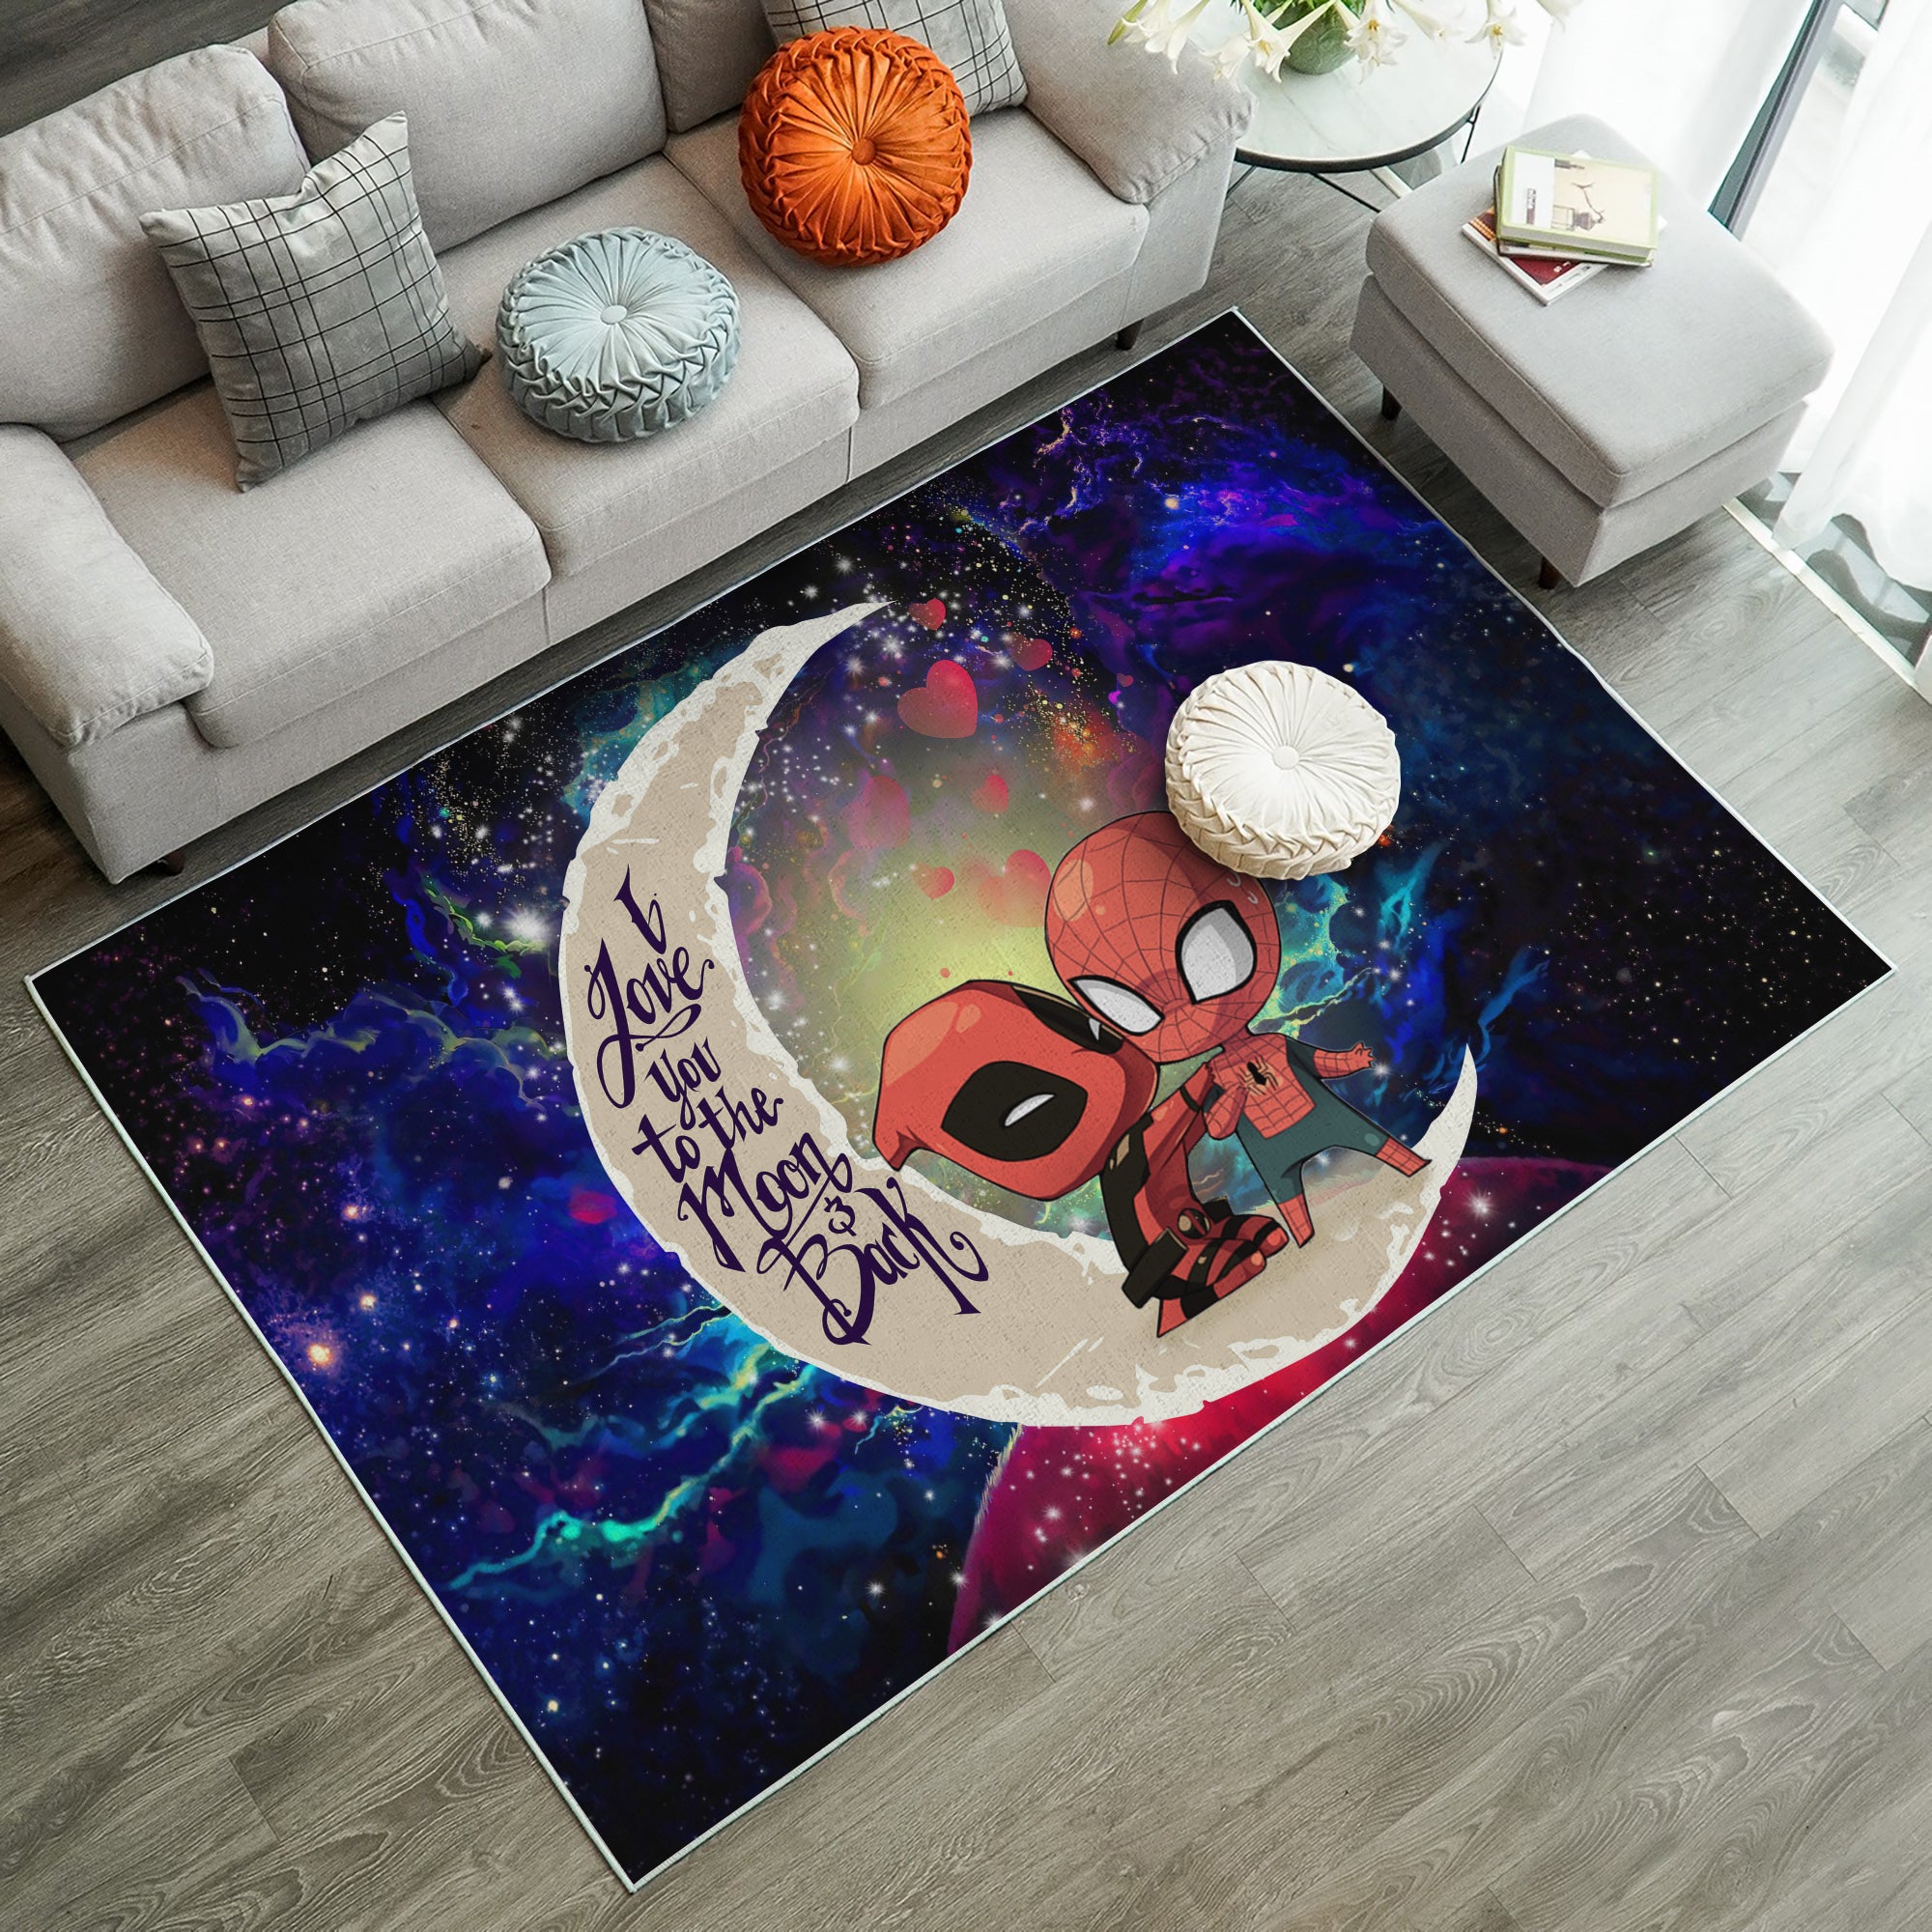 Spiderman And Deadpool Couple Love You To The Moon Galaxy Carpet Rug Home Room Decor